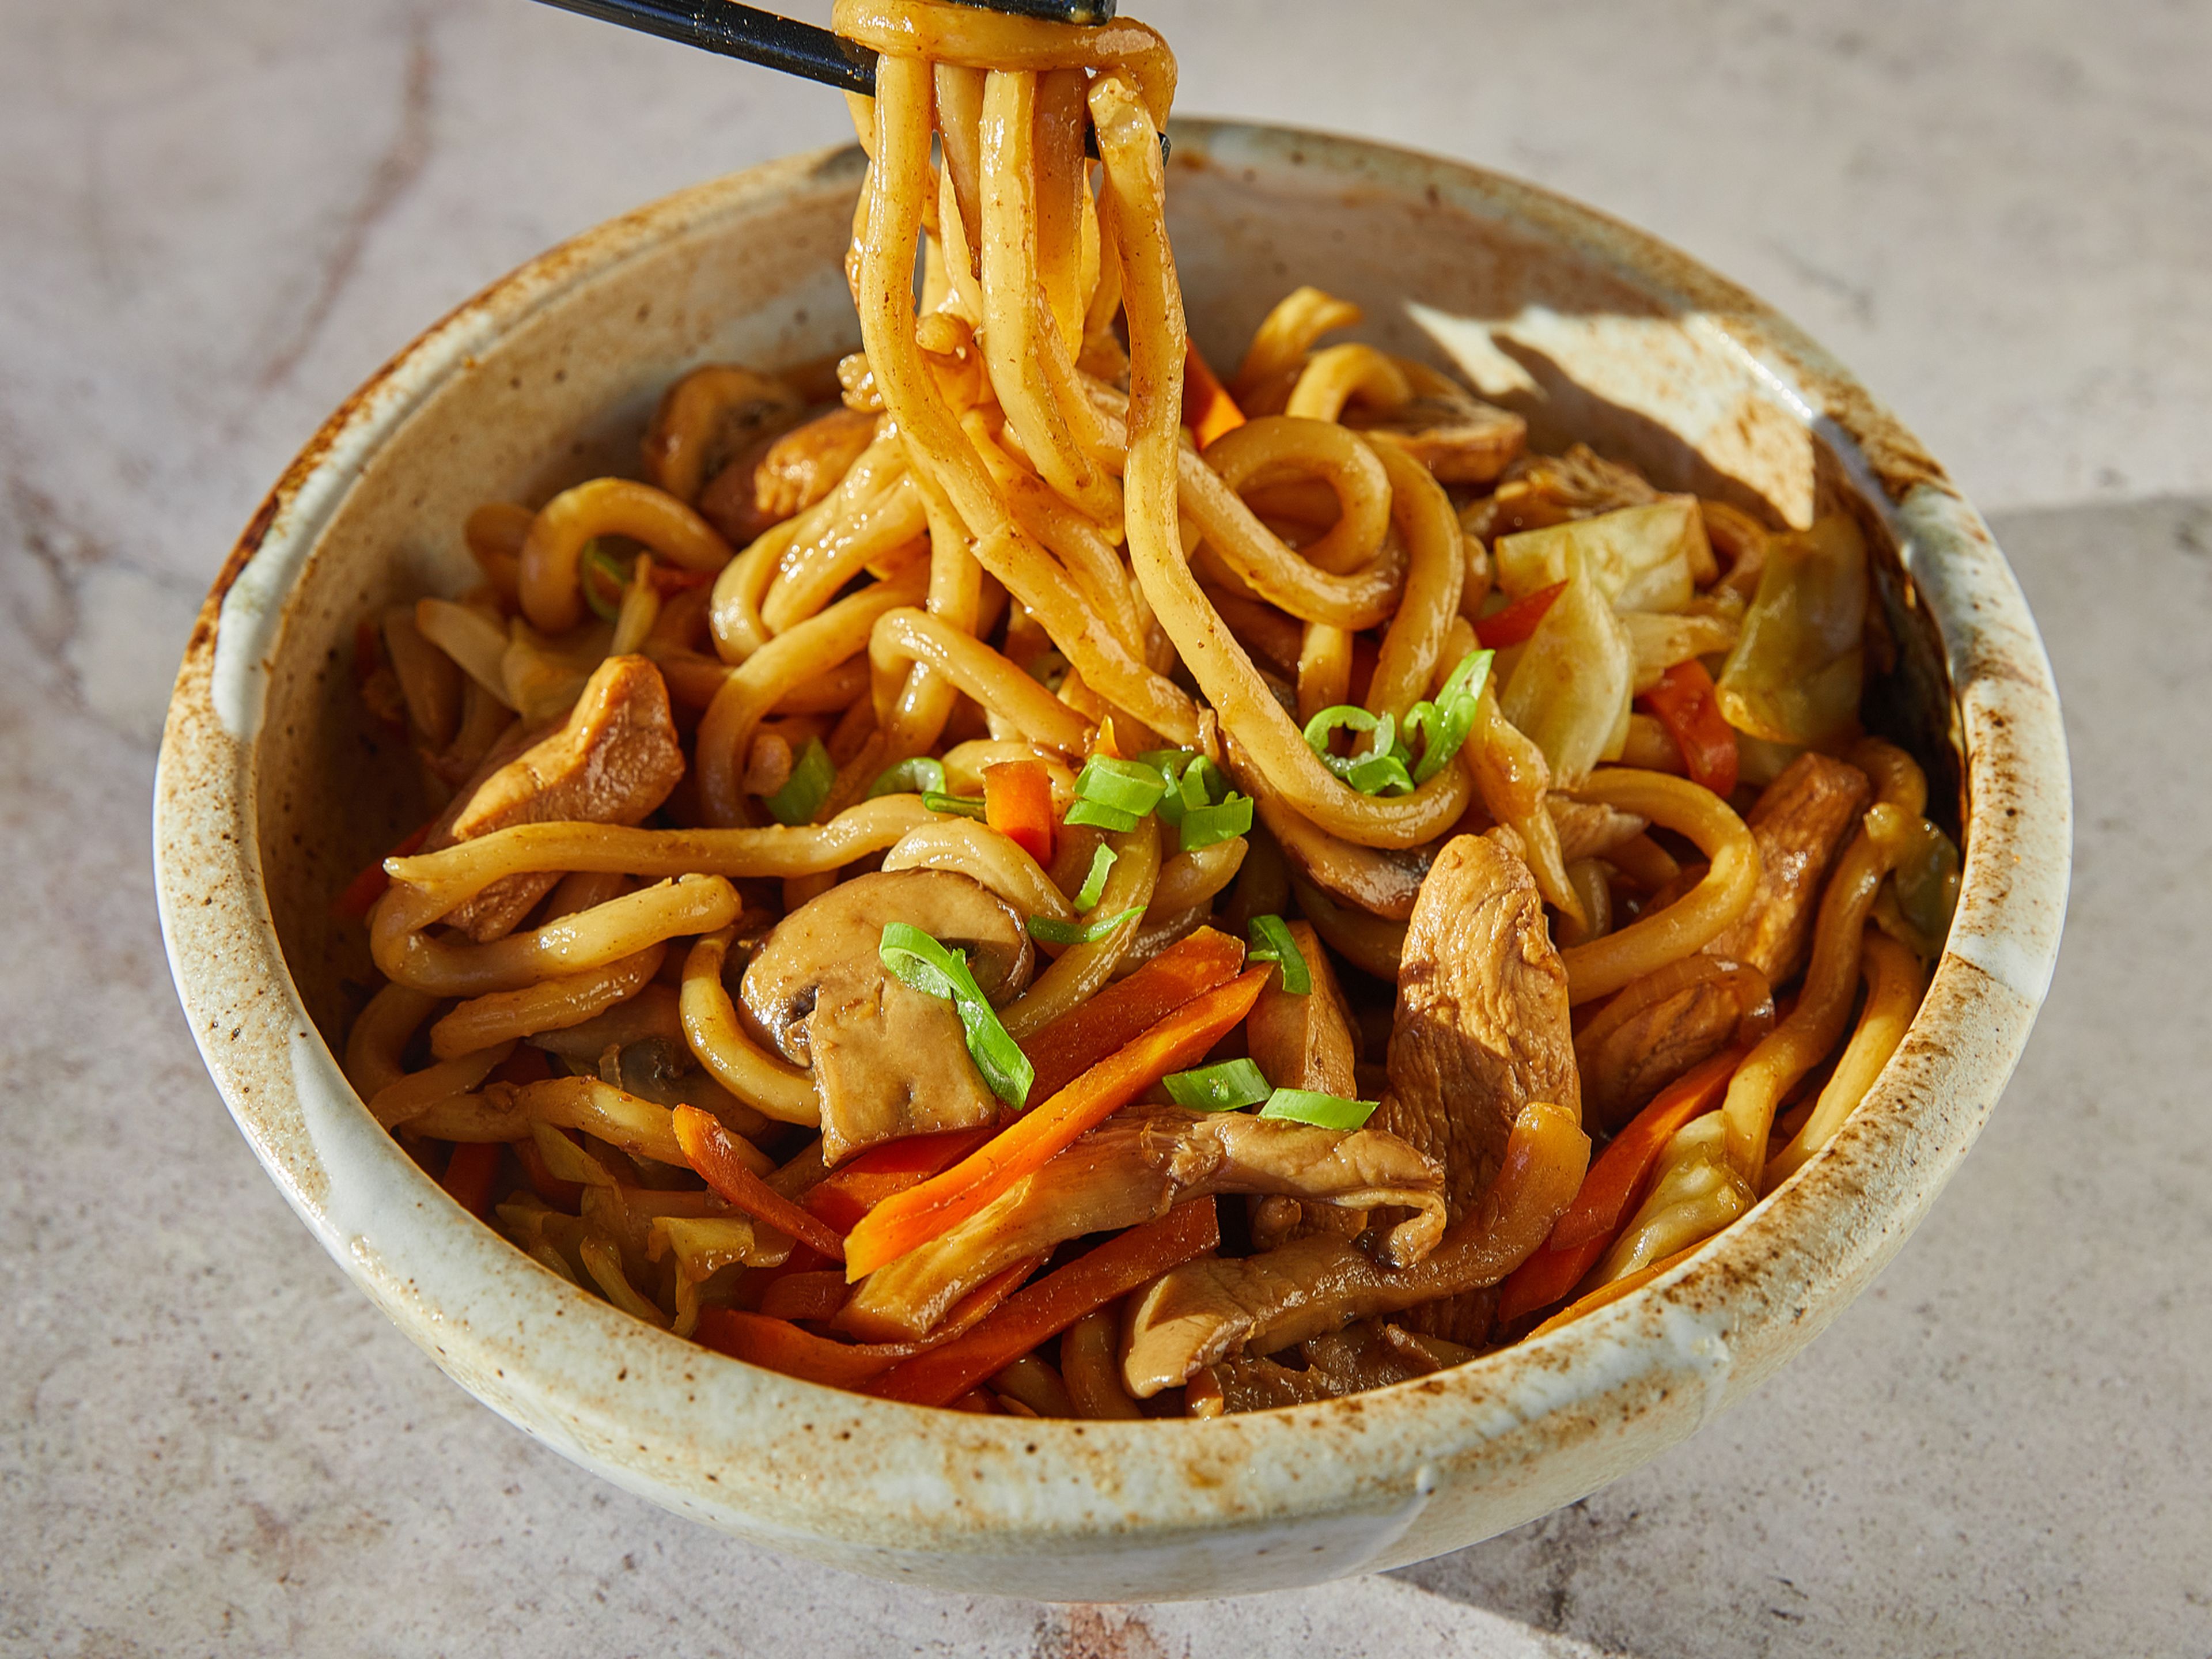 Chicken Udon Stir Fry: Creating Flavorful Asian Dishes